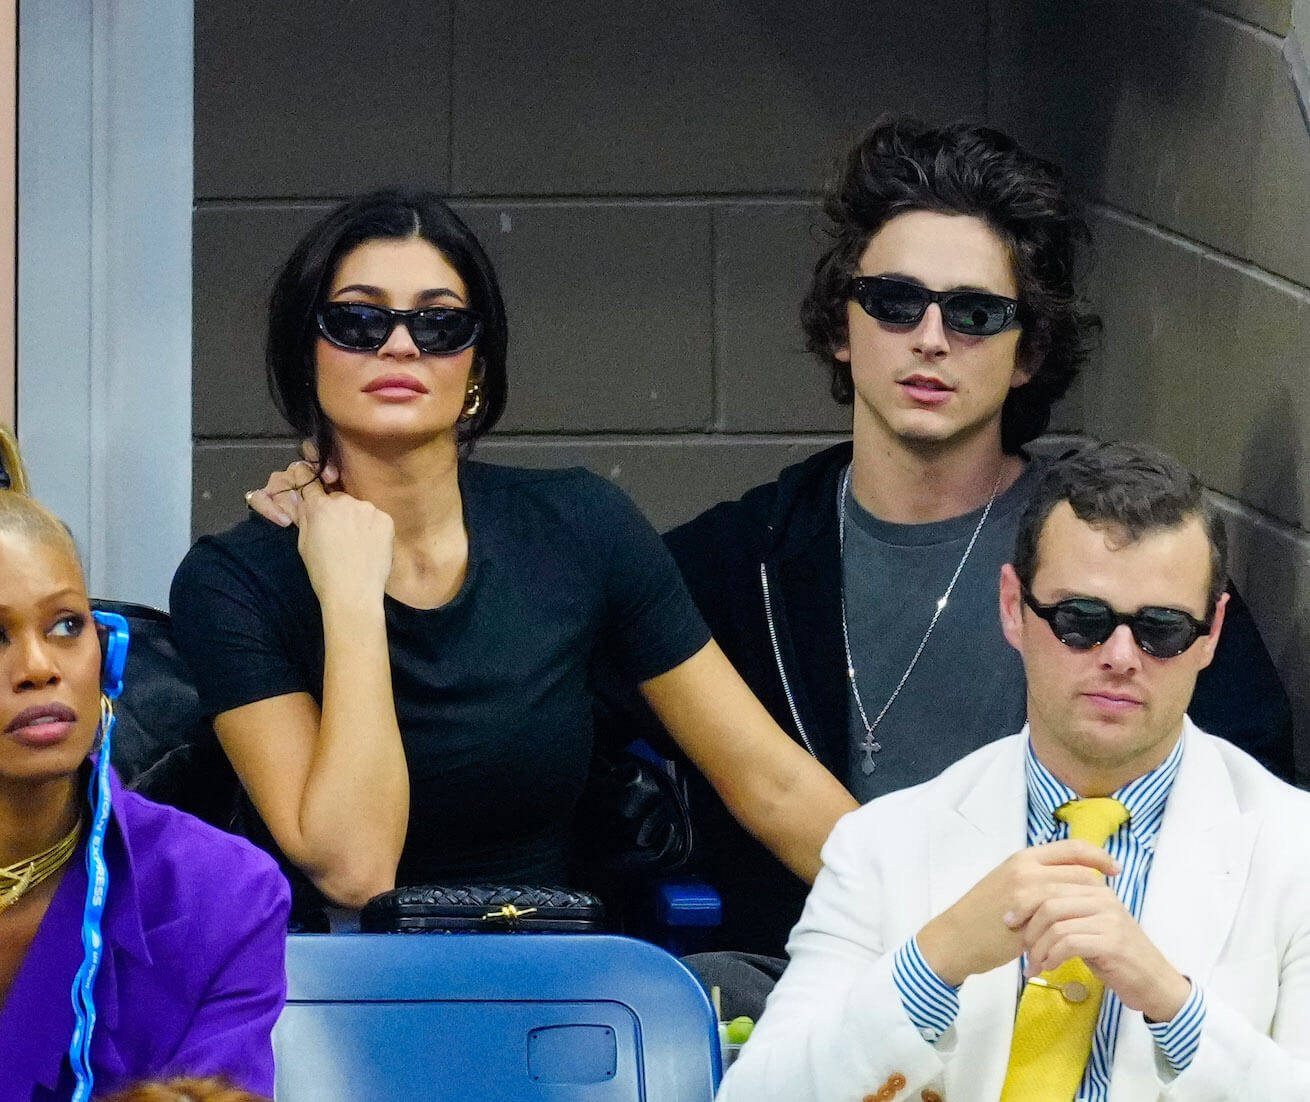 Kylie Jenner and Timothée Chalamet sitting next to each other and wearing sunglasses at the 2023 US Open Tennis Championships